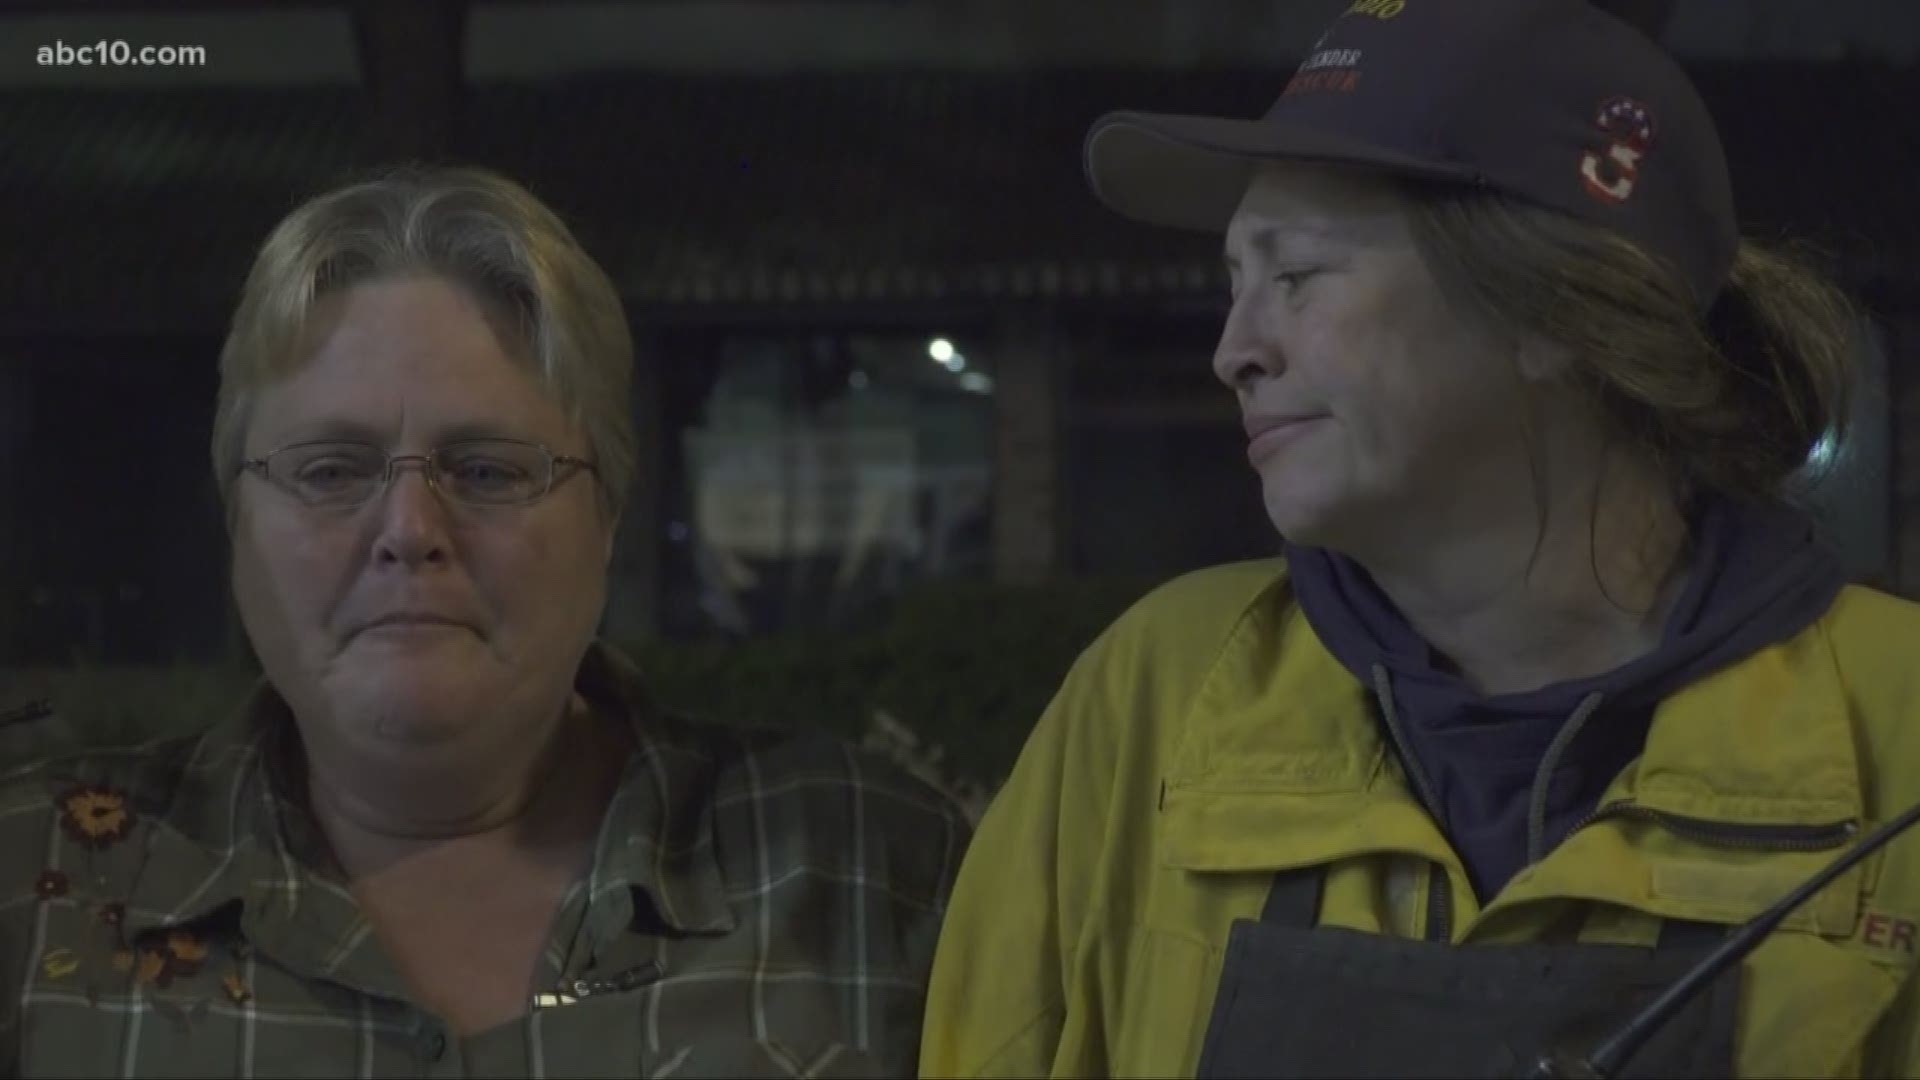 Two sisters, one of them a volunteer firefighter, met up in Oroville Monday night after several days apart due to the Camp Fire.